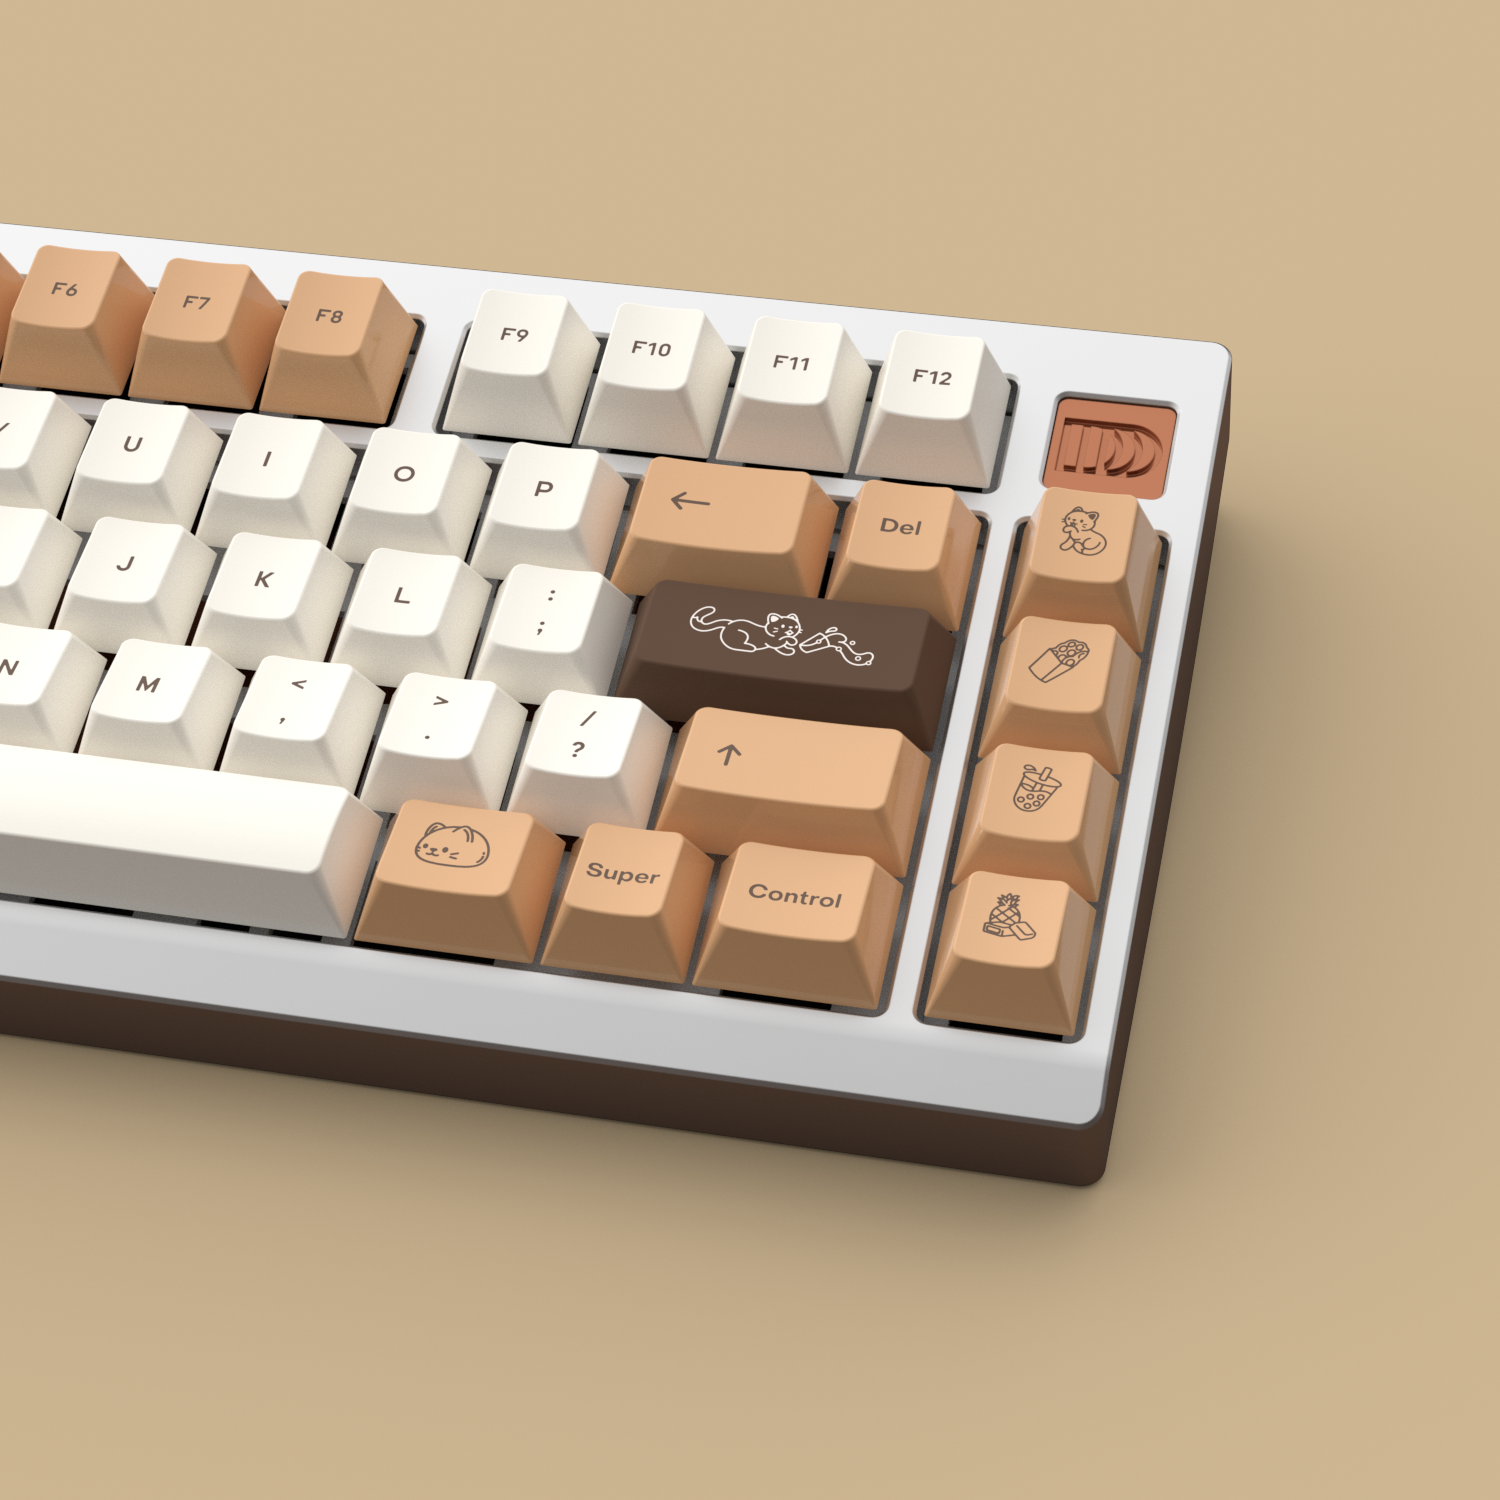 Brown Sugar Boba keycaps on a silver Serendipity 40% keyboard against a light brown background.